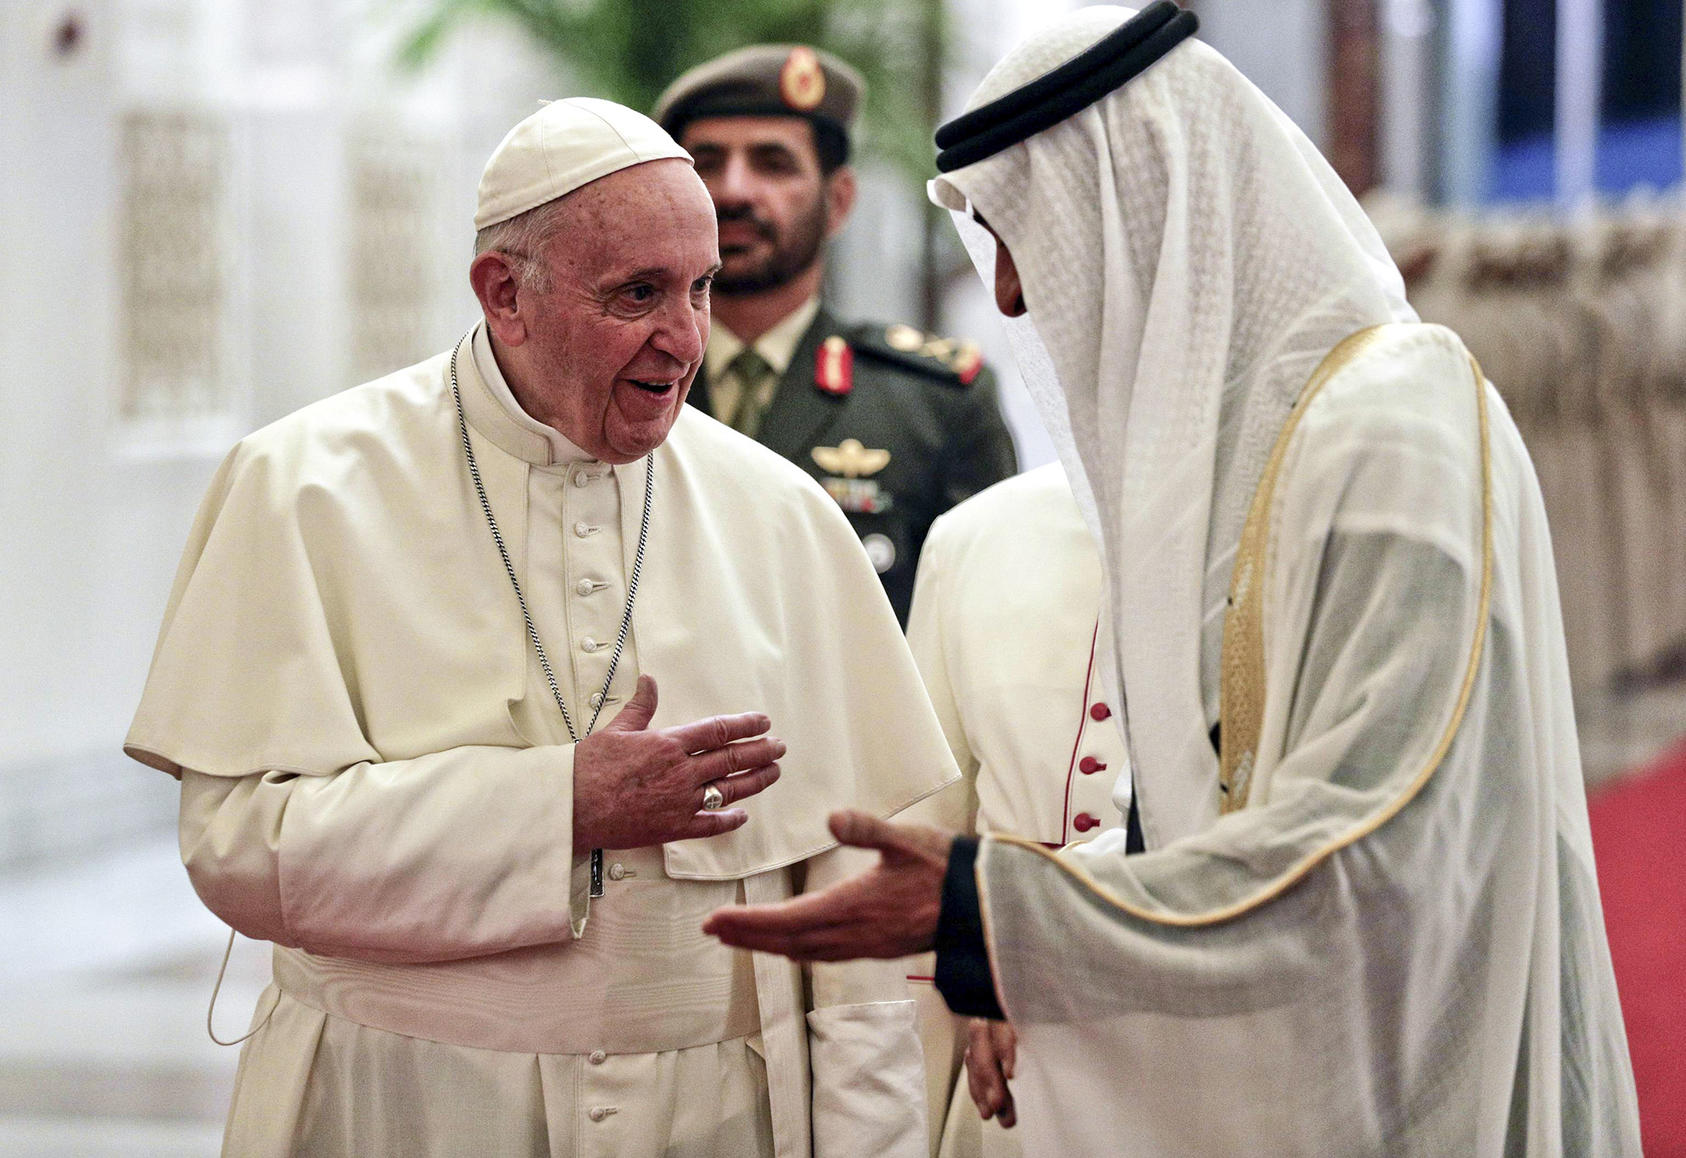 Pope Francis is welcomed by the Crown Prince of Abu Dhabi, Sheikh Mohammed bin Zayed Al Nahyan, at the airport in Abu Dhabi, United Arab Emirates, Feb. 3, 2019. (Andrew Medichini/Pool via The New York Times)